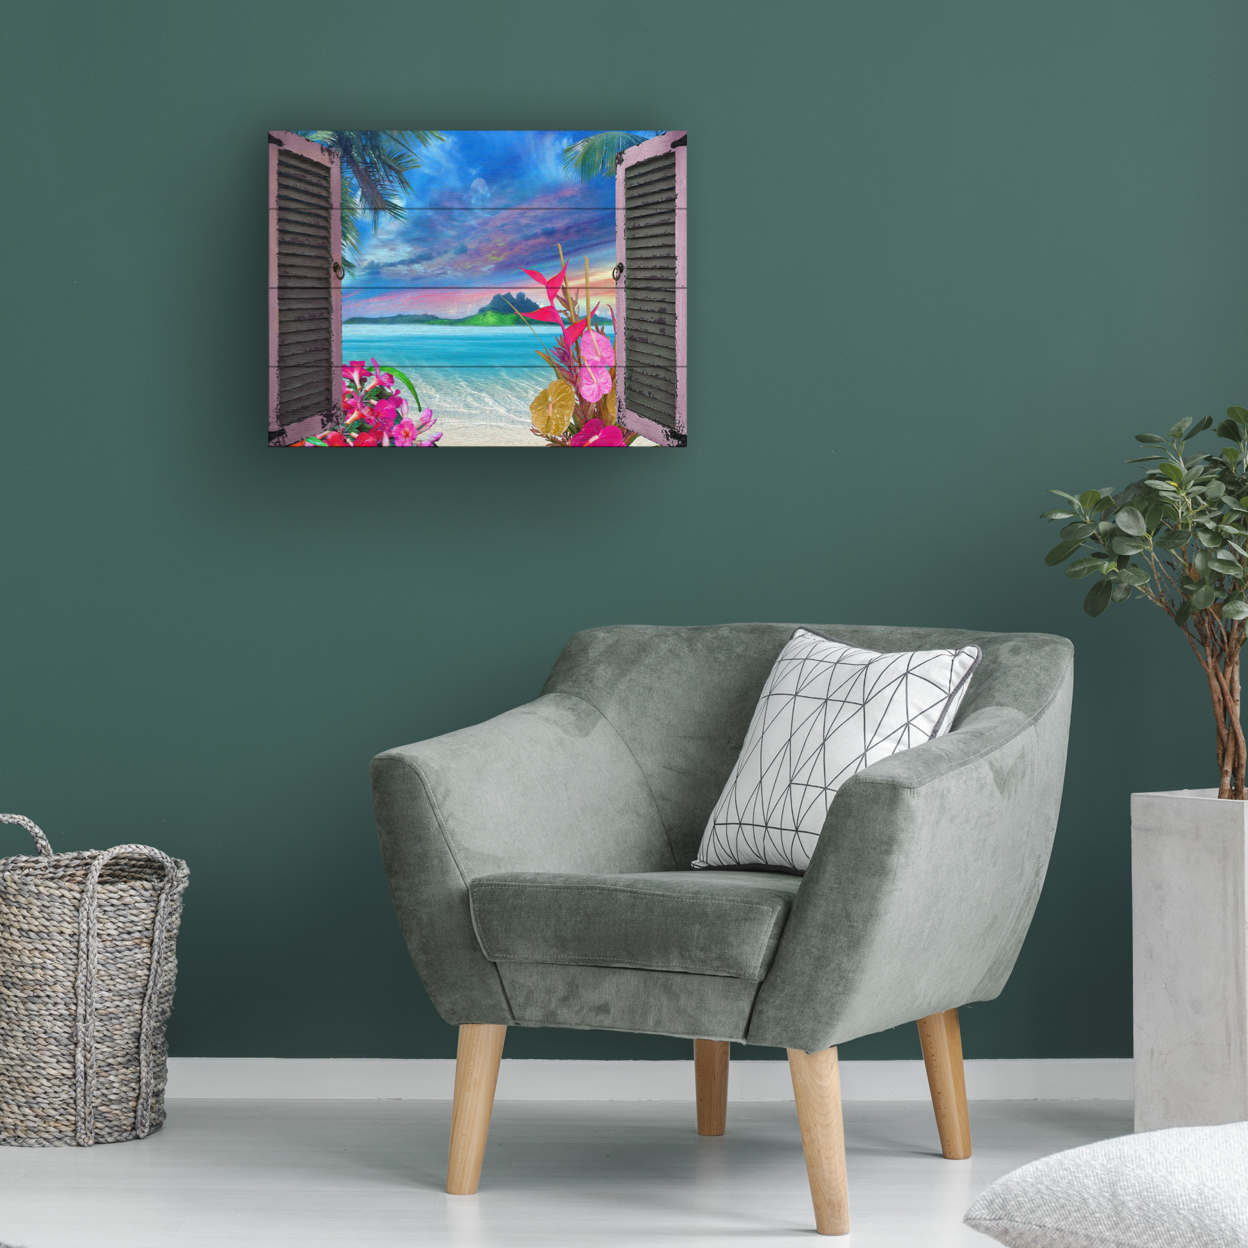 Wall Art 12 X 16 Inches Titled Window To Paradise VII Ready To Hang Printed On Wooden Planks